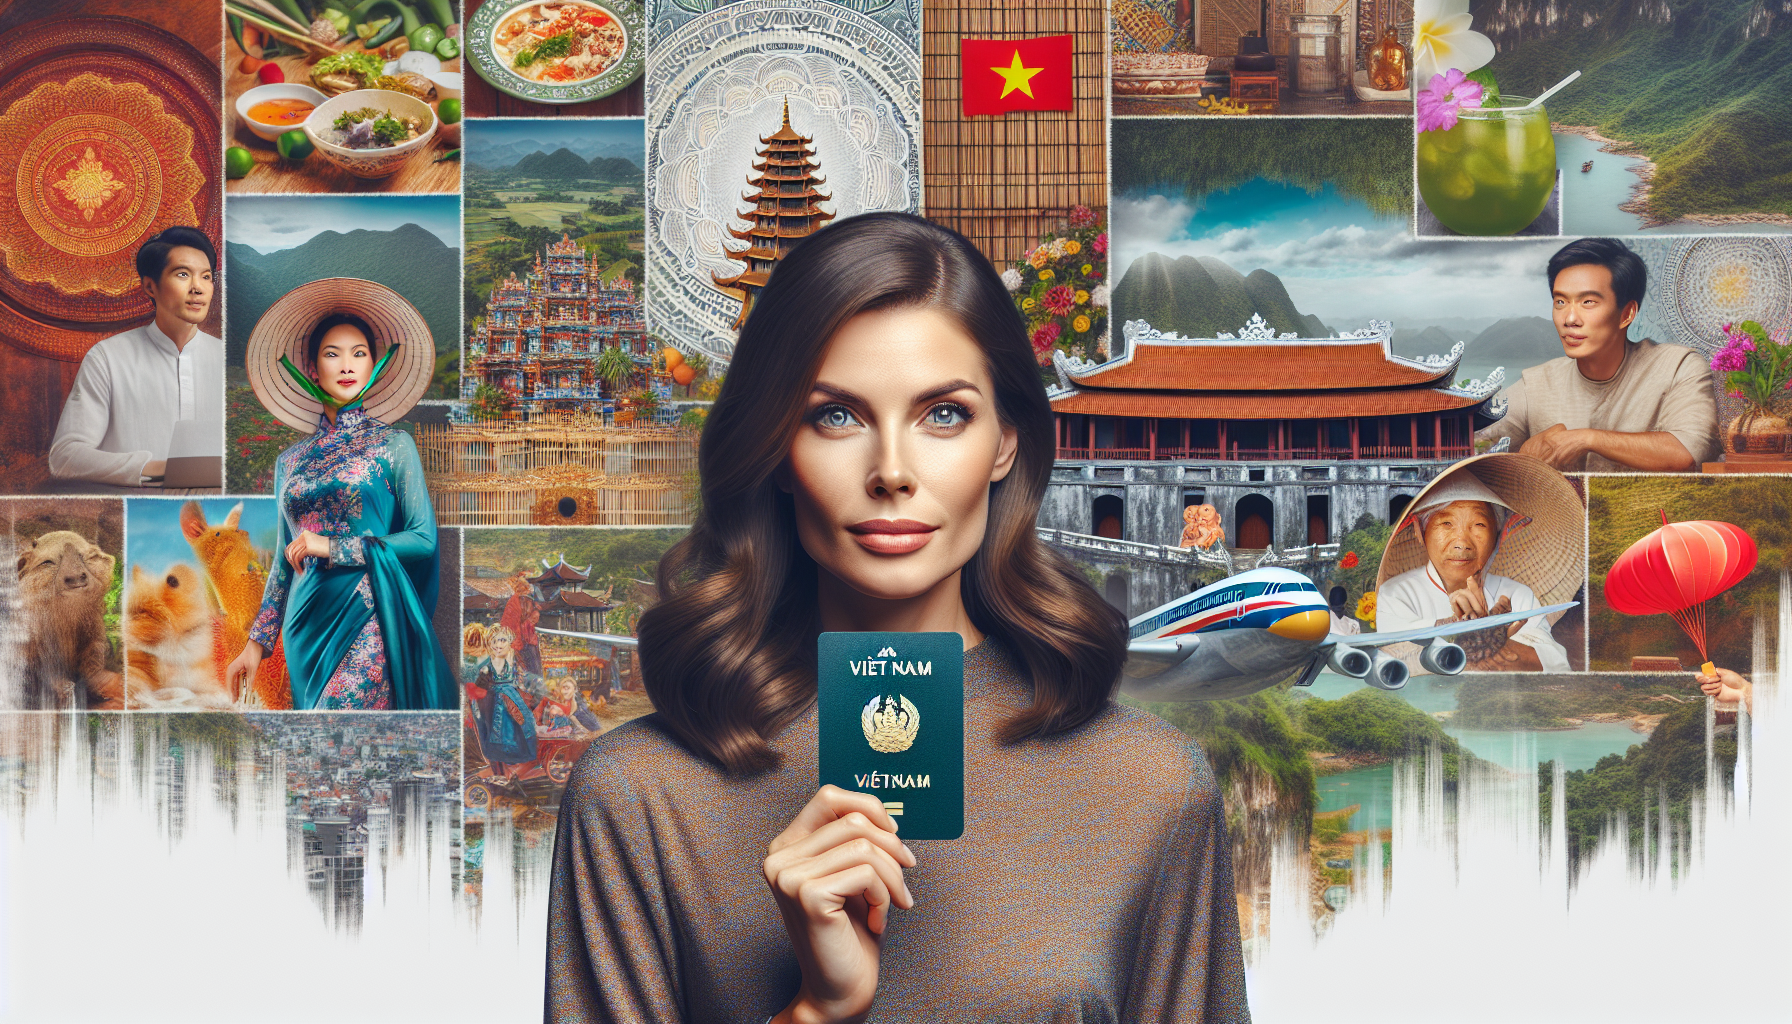 Do Italian Citizens Require Vietnamese Sponsorship for Business Visas? How to Apply?